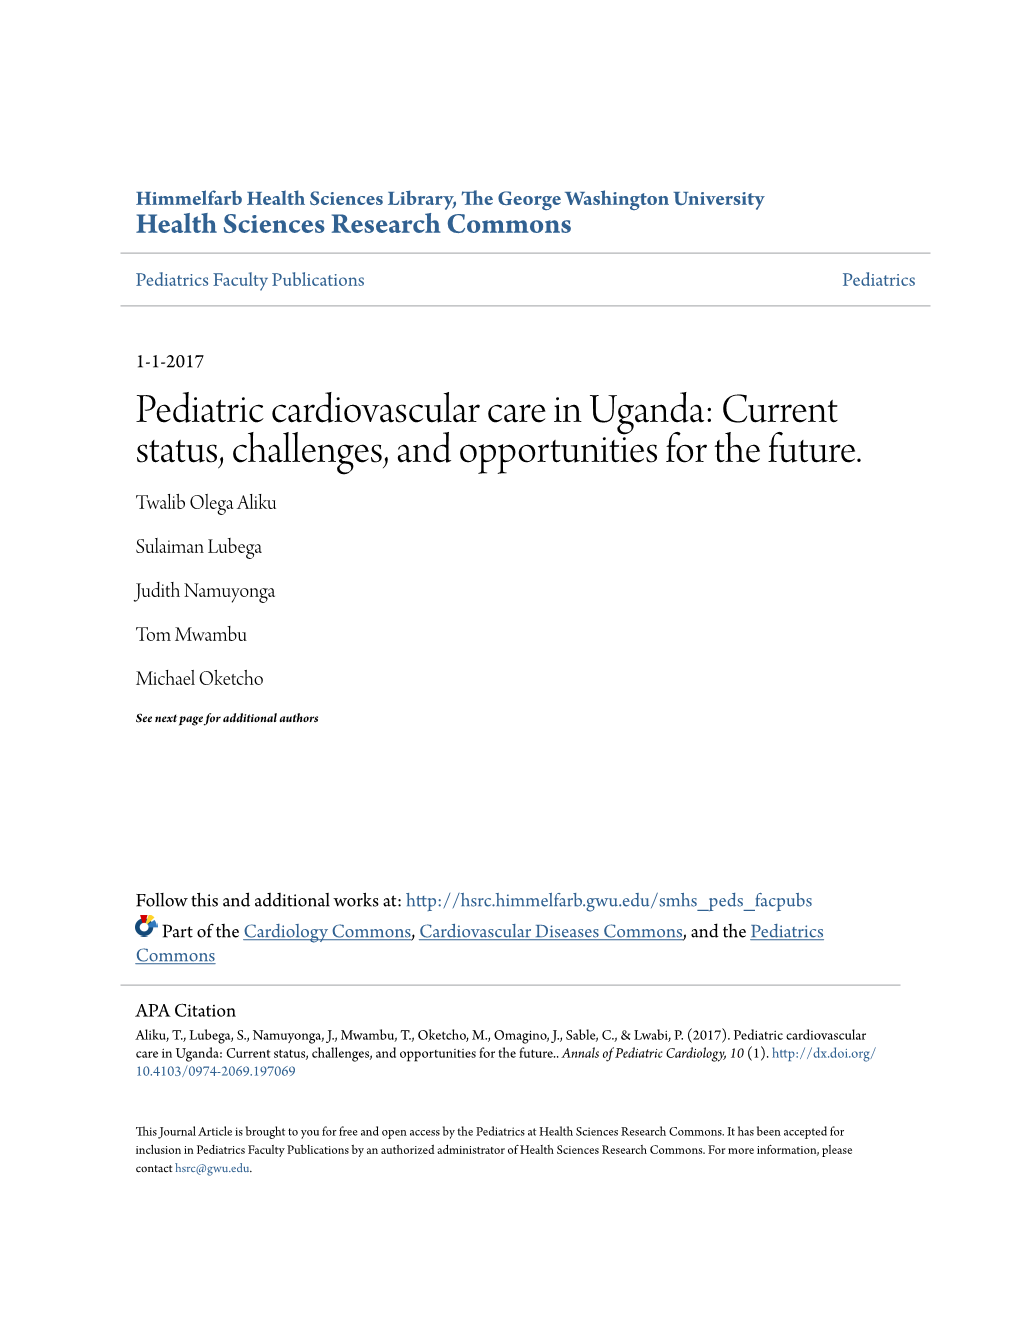 Pediatric Cardiovascular Care in Uganda: Current Status, Challenges, and Opportunities for the Future